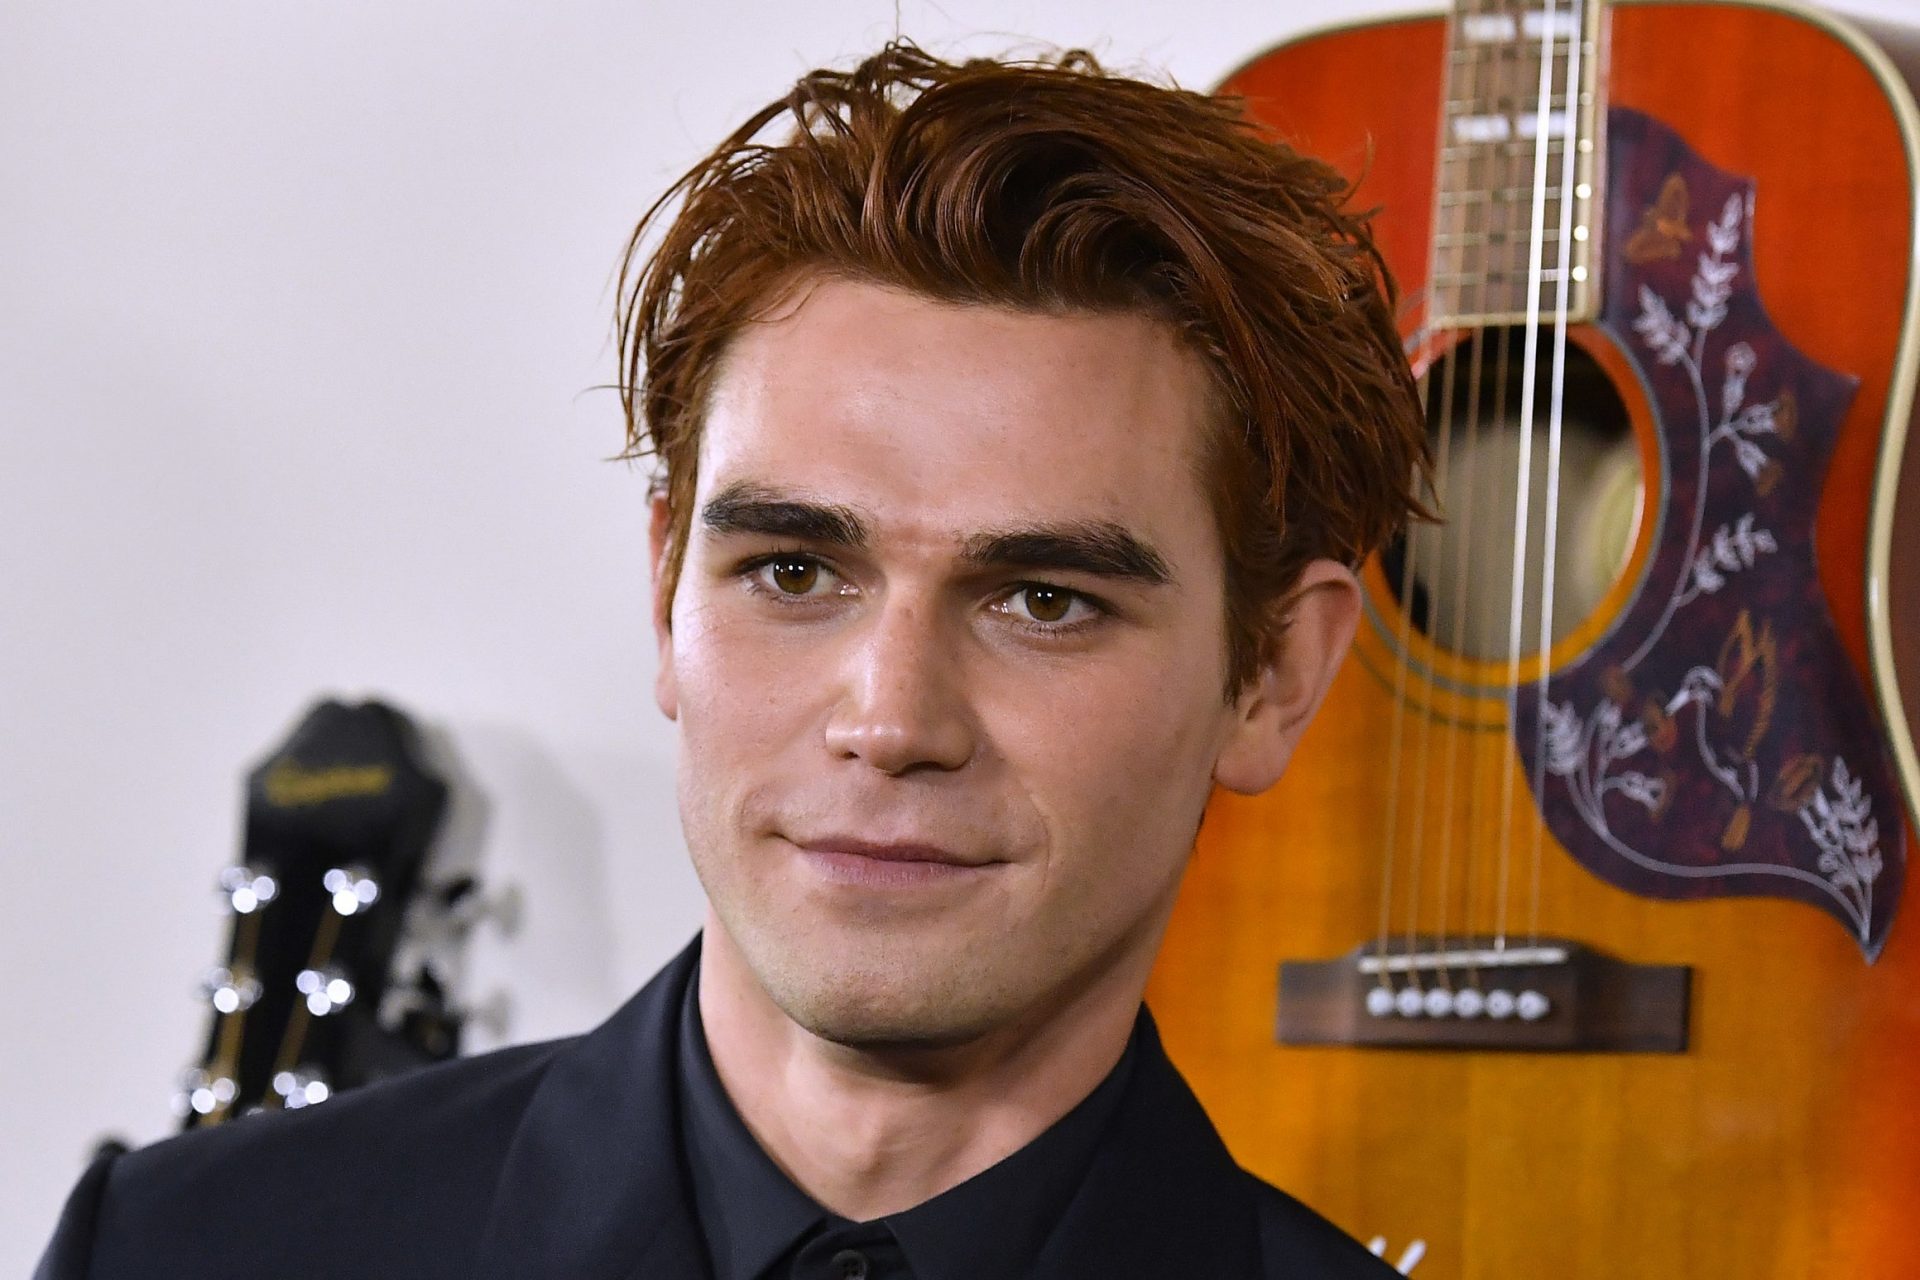 KJ Apa Opened Up To Demi Moore About Why Working On “Riverdale” Feels Take care of “Penal advanced”